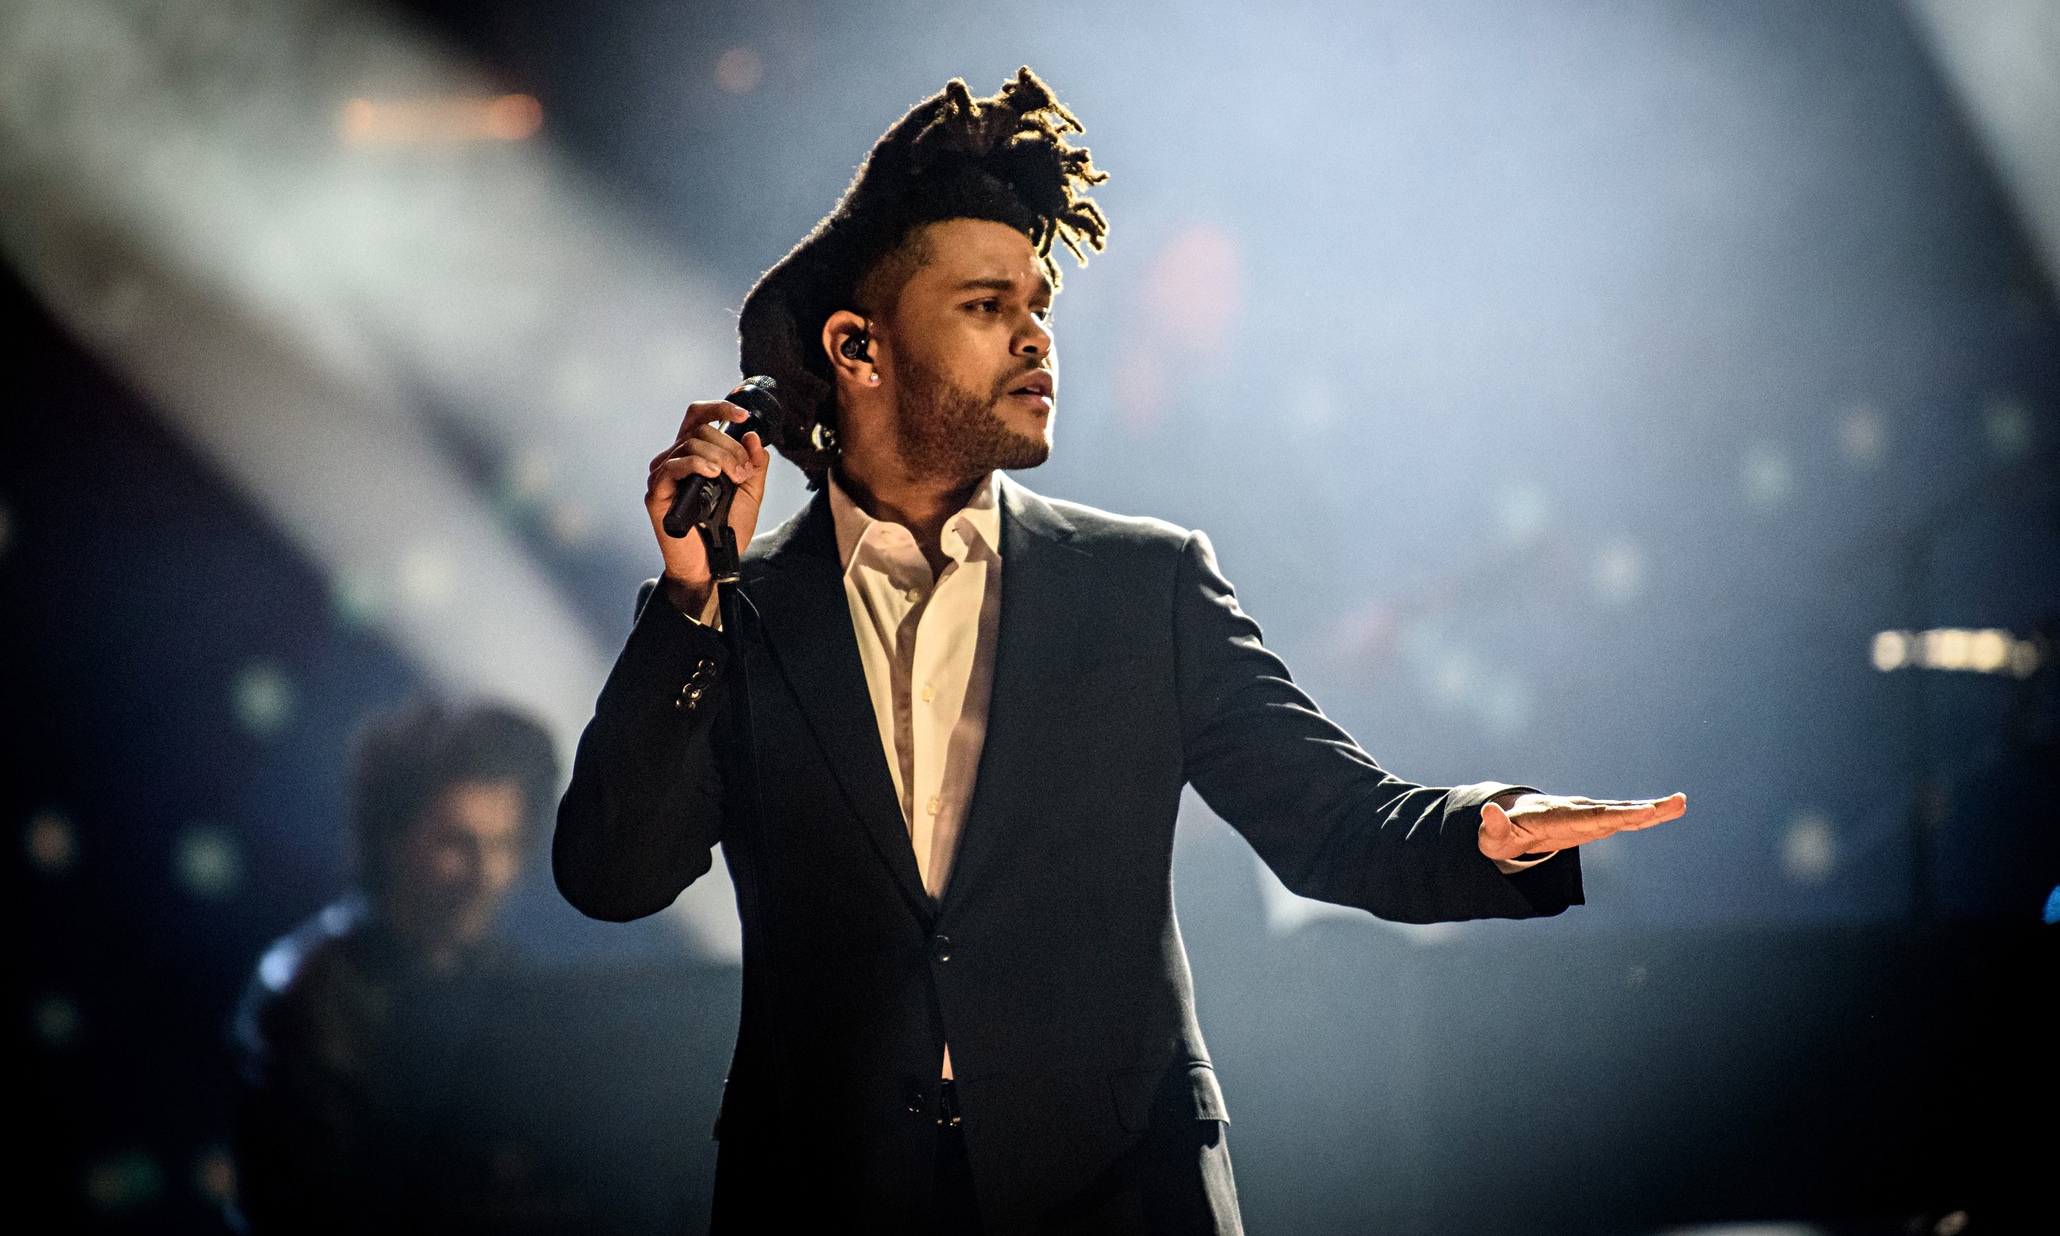 The Weeknd at the Juno Awards in Canada this year